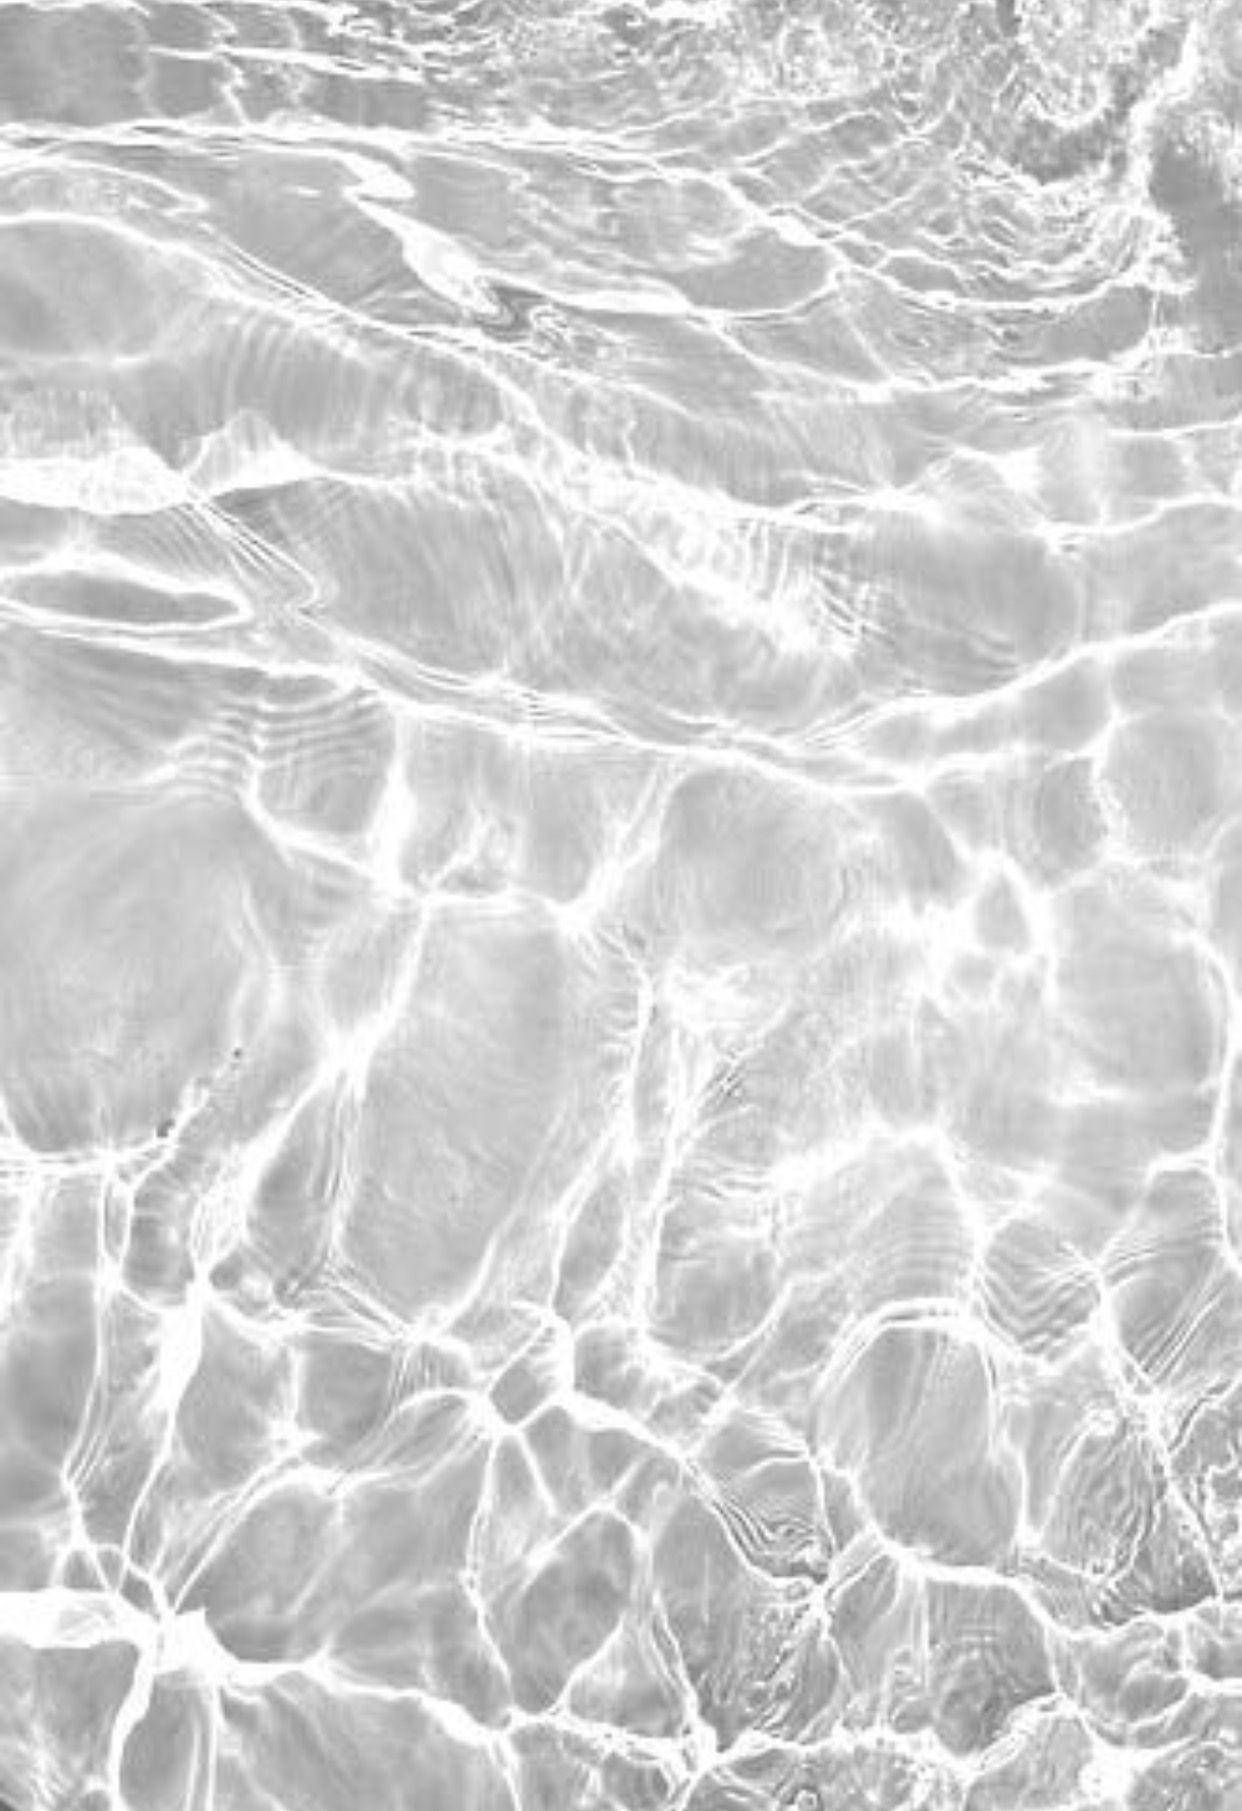 A Black And White Photo Of Water In The Ocean Background